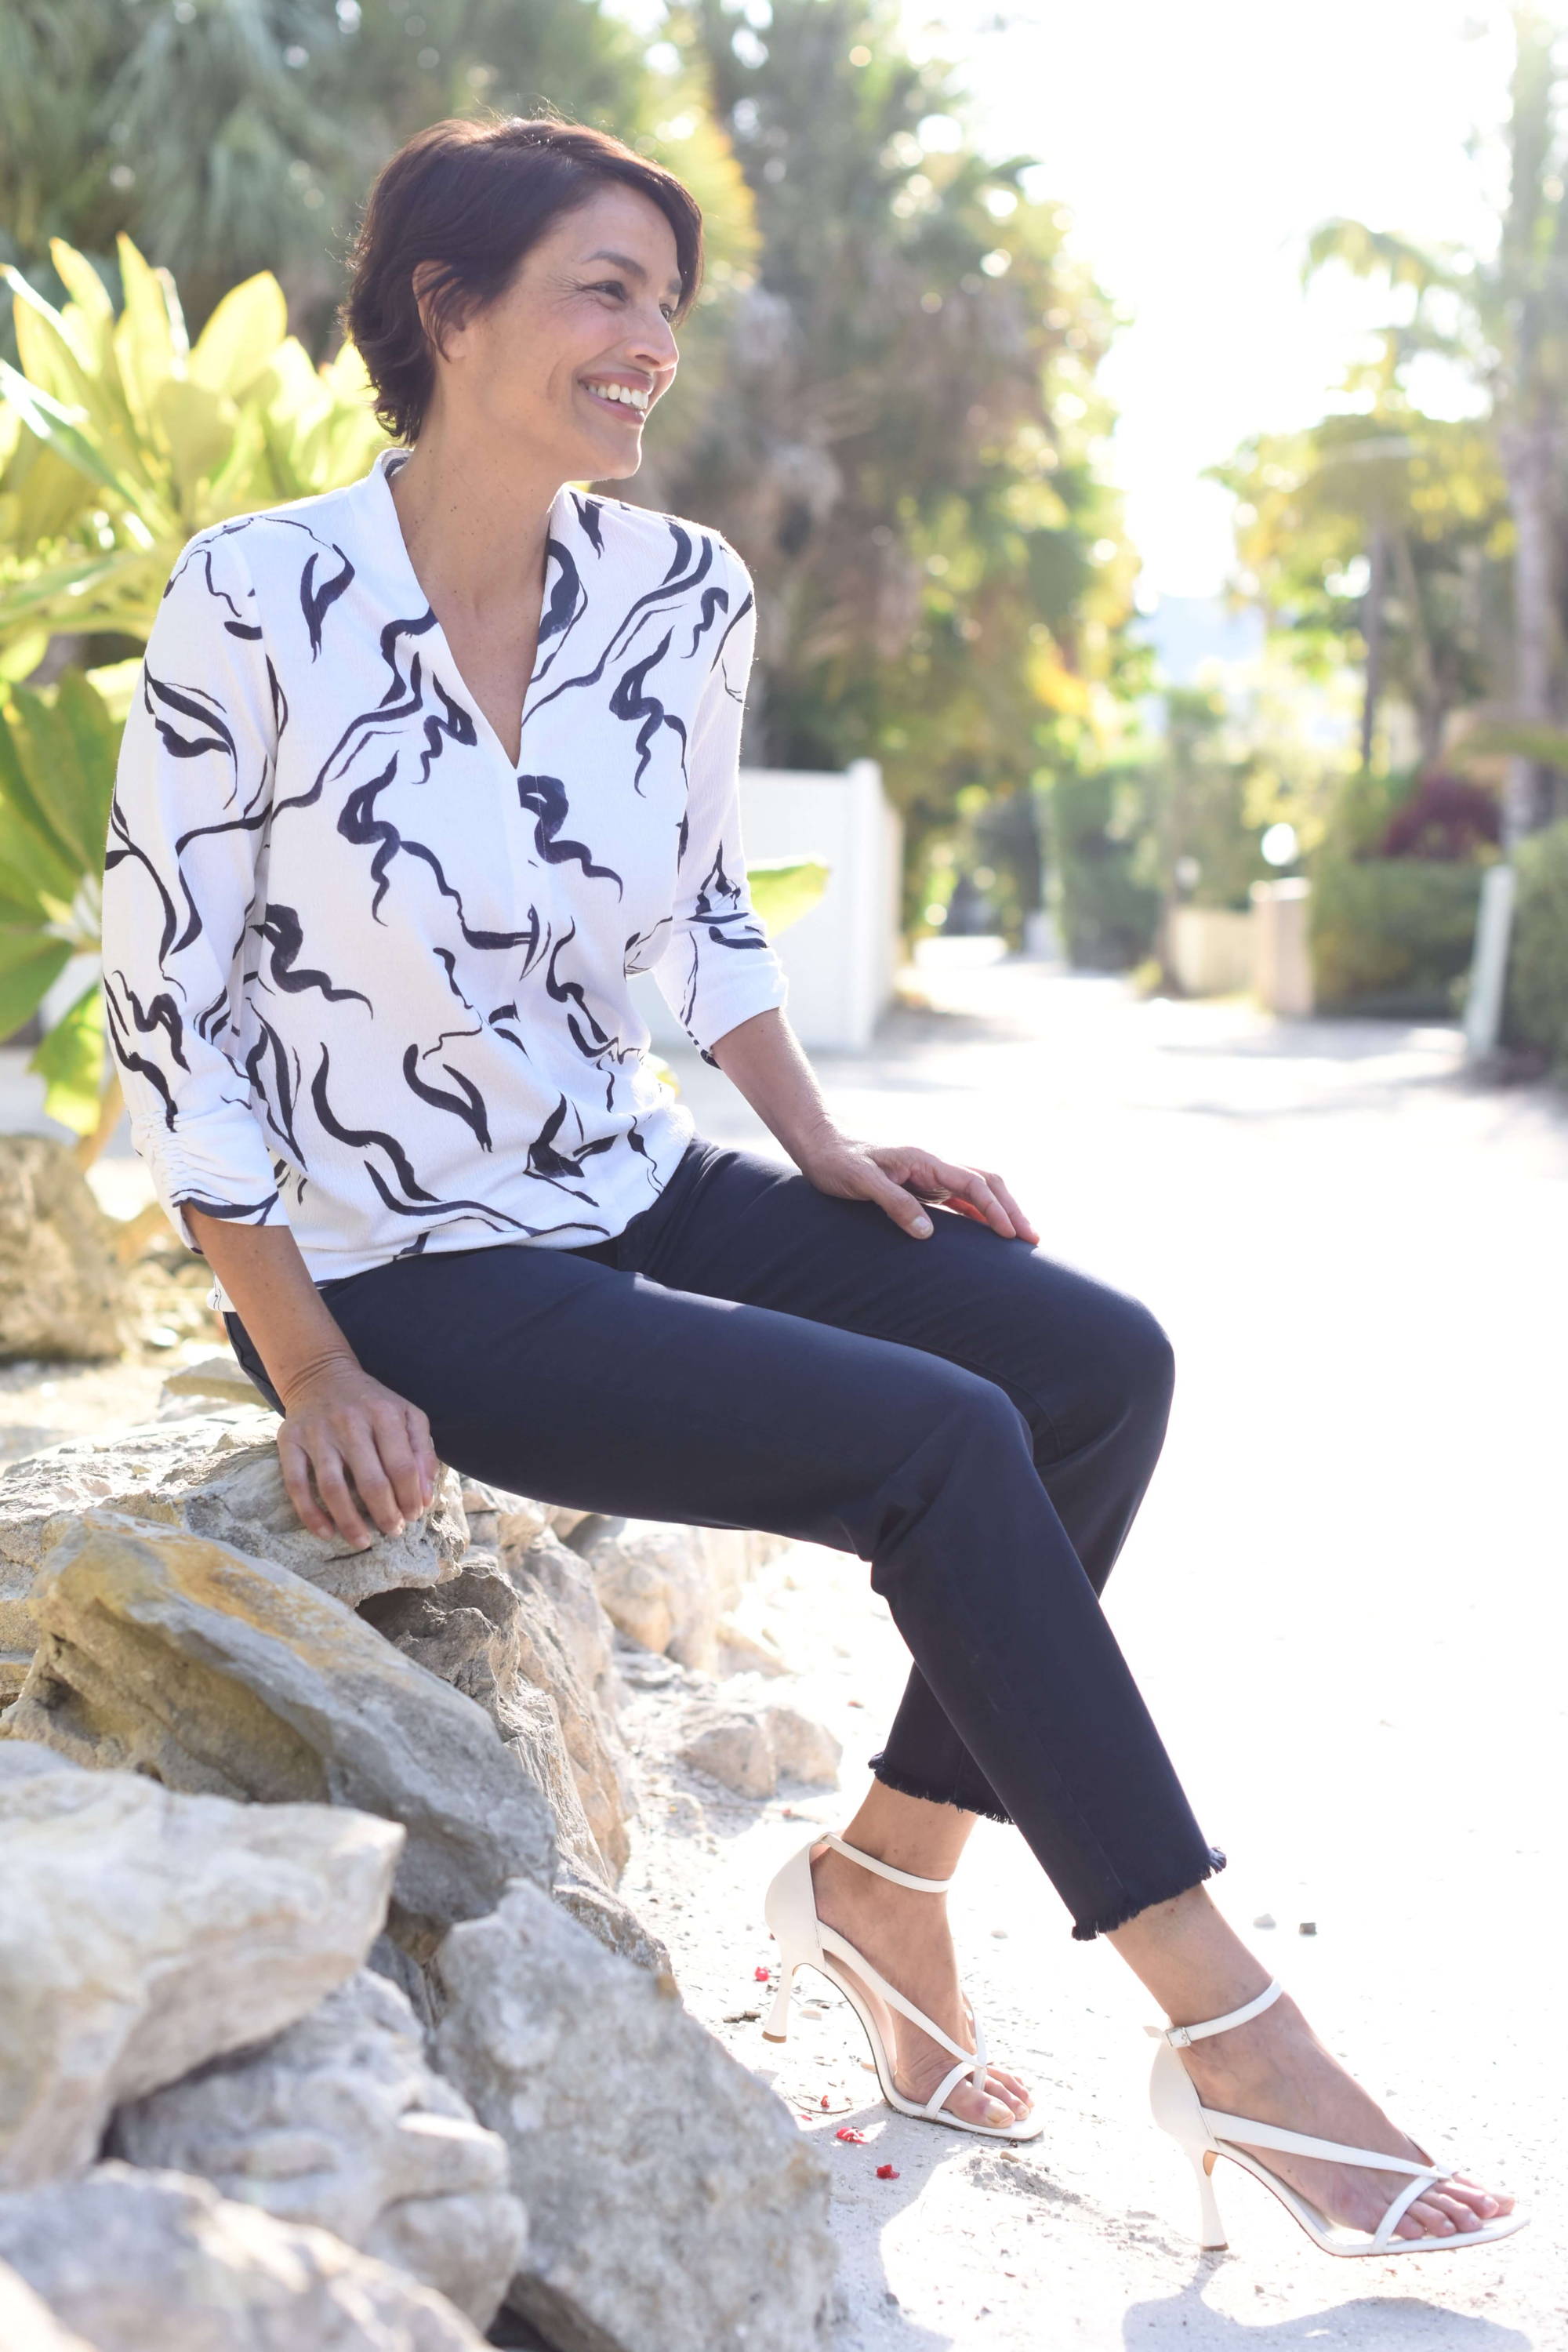 A smiling woman with short dark hair is wearing a printed top, ankle pants, and heels as she sits on a rock near the ocean